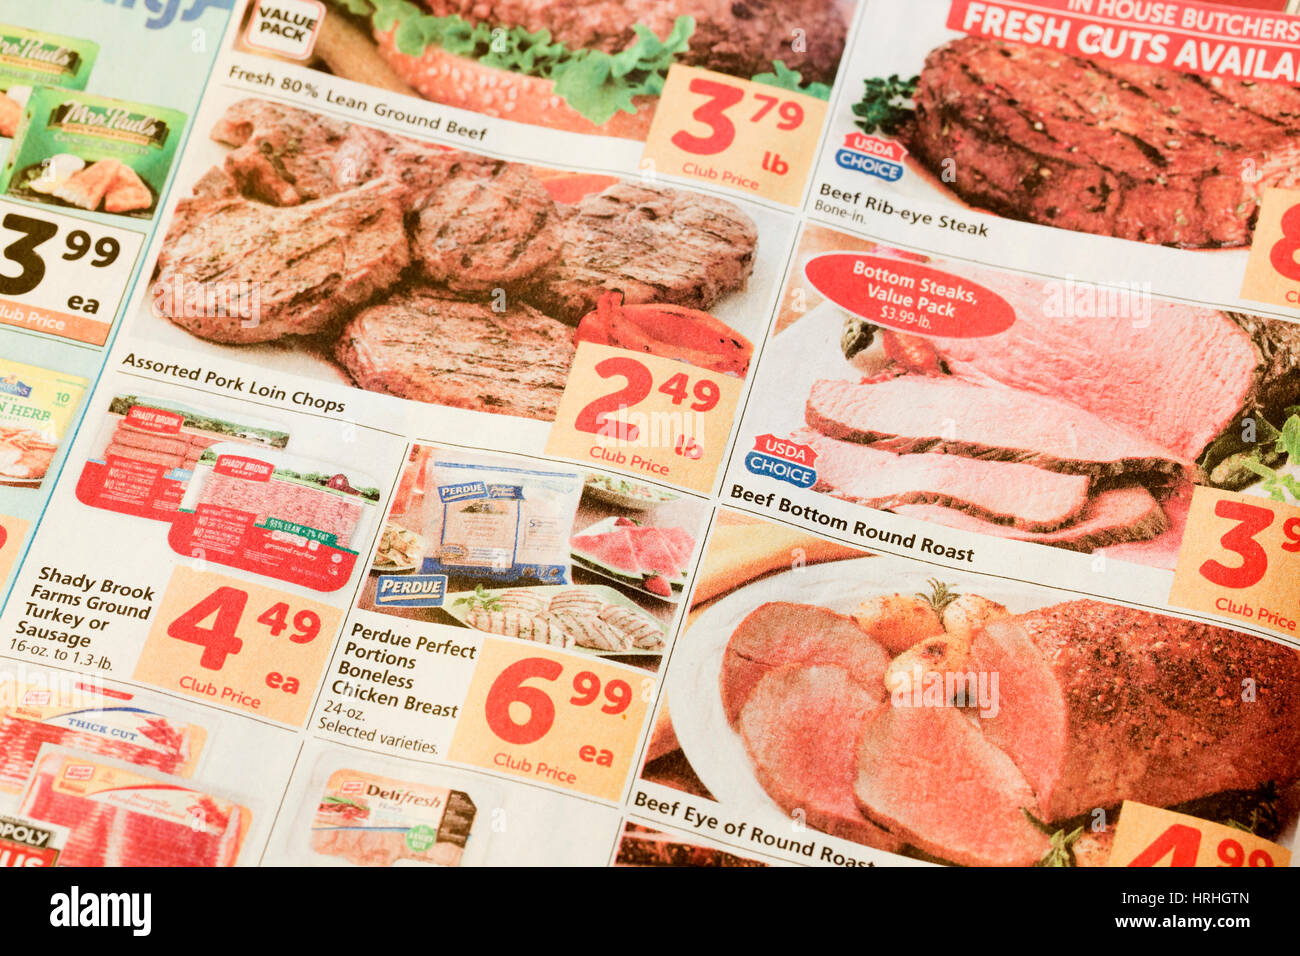 Grocery store mailer / coupons in newspaper - USA Stock Photo